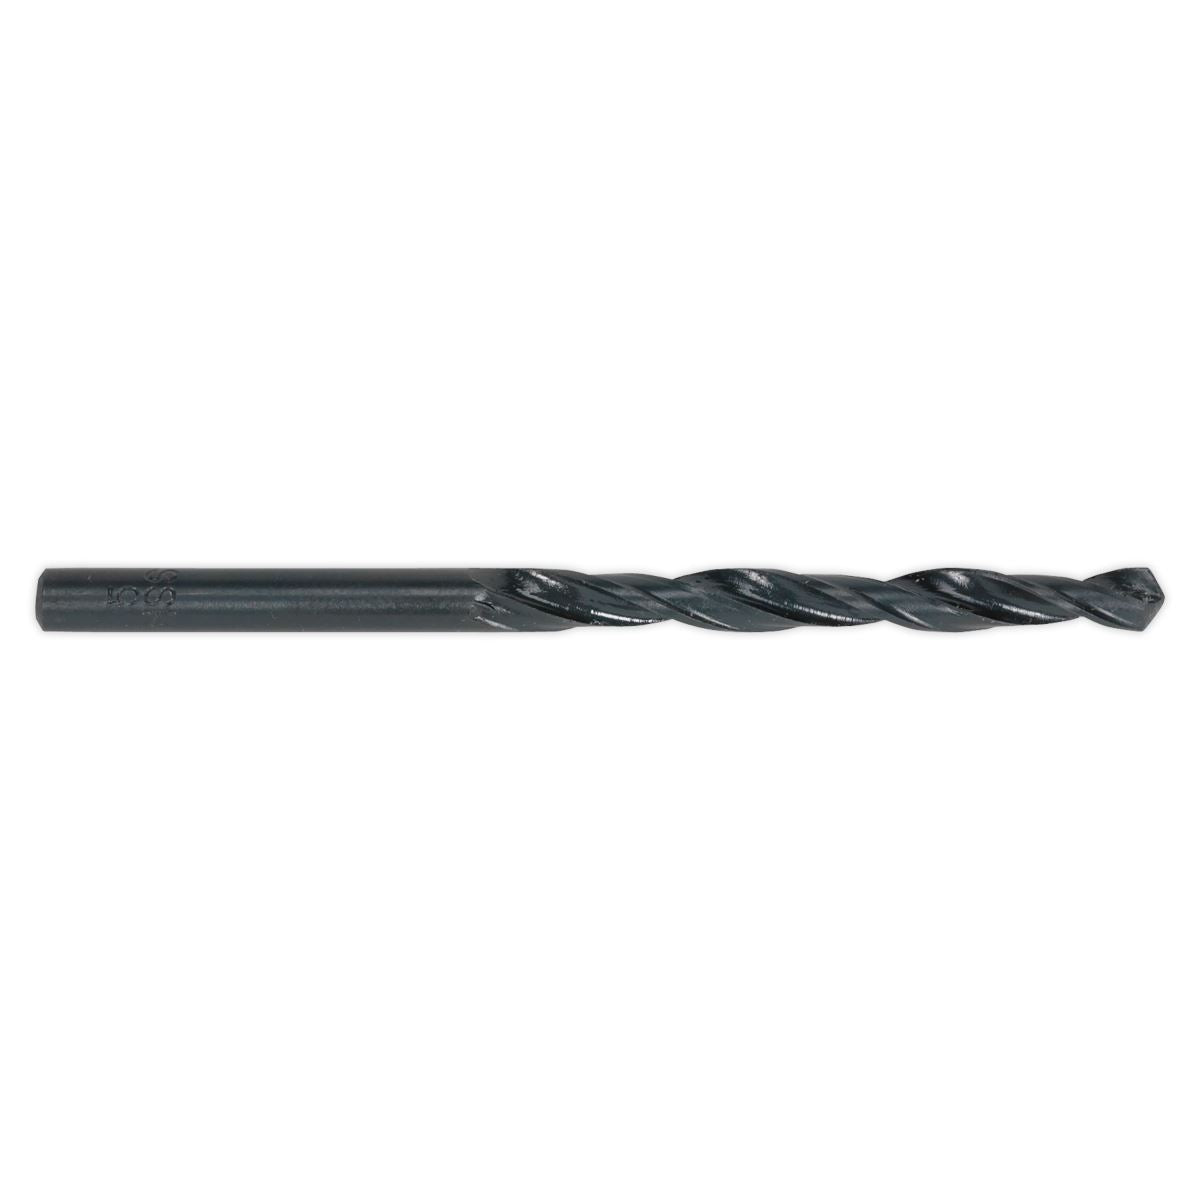 Sealey HSS Roll Forged Drill Bit Ø1.5mm Pack of 10